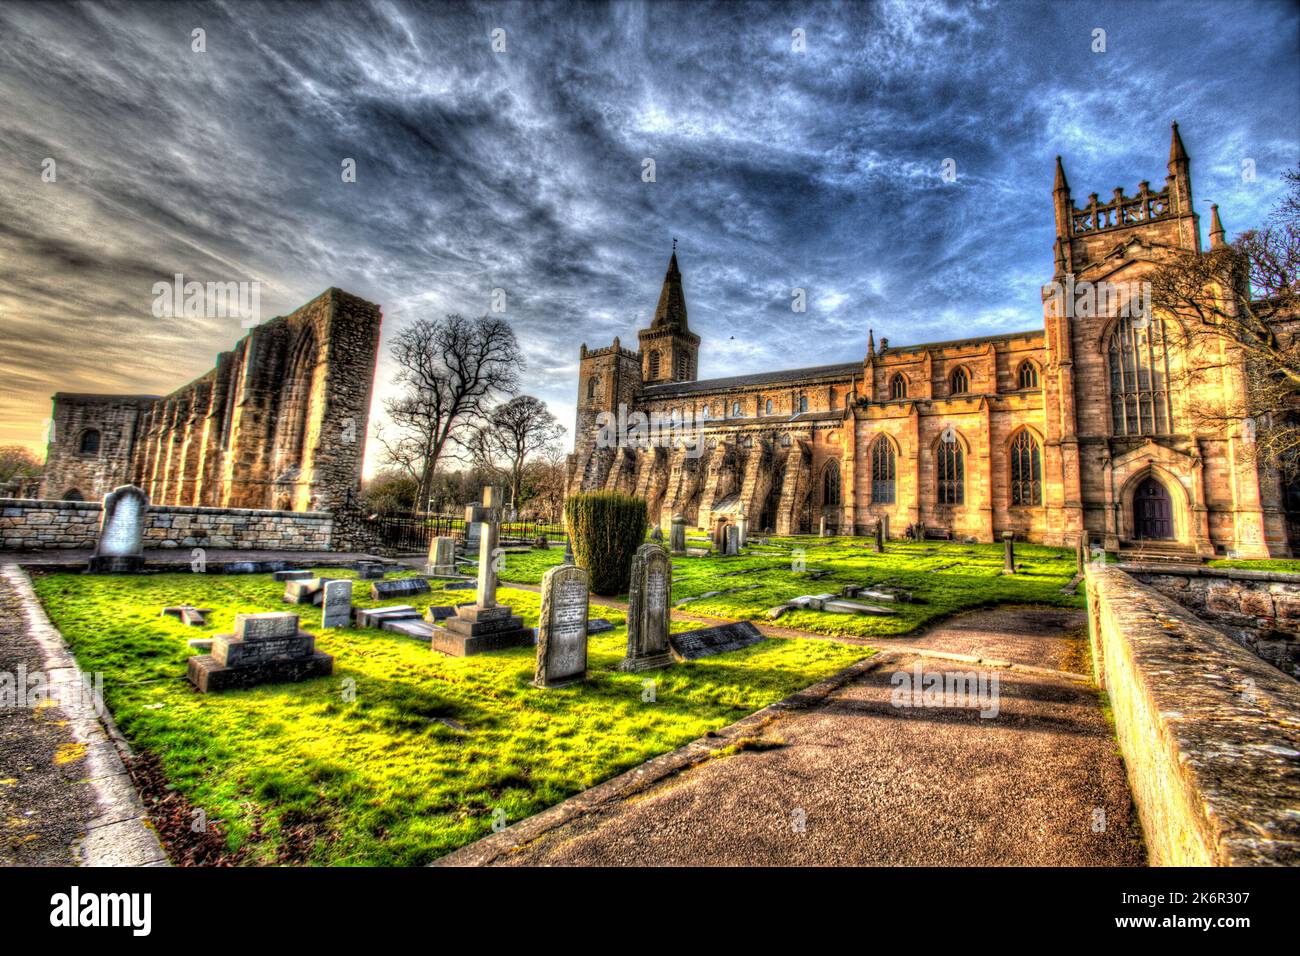 City of Dunfermline, Scotland. Artistic view of the southern façade of Dunfermline Abbey, with the palace on the left. Stock Photo